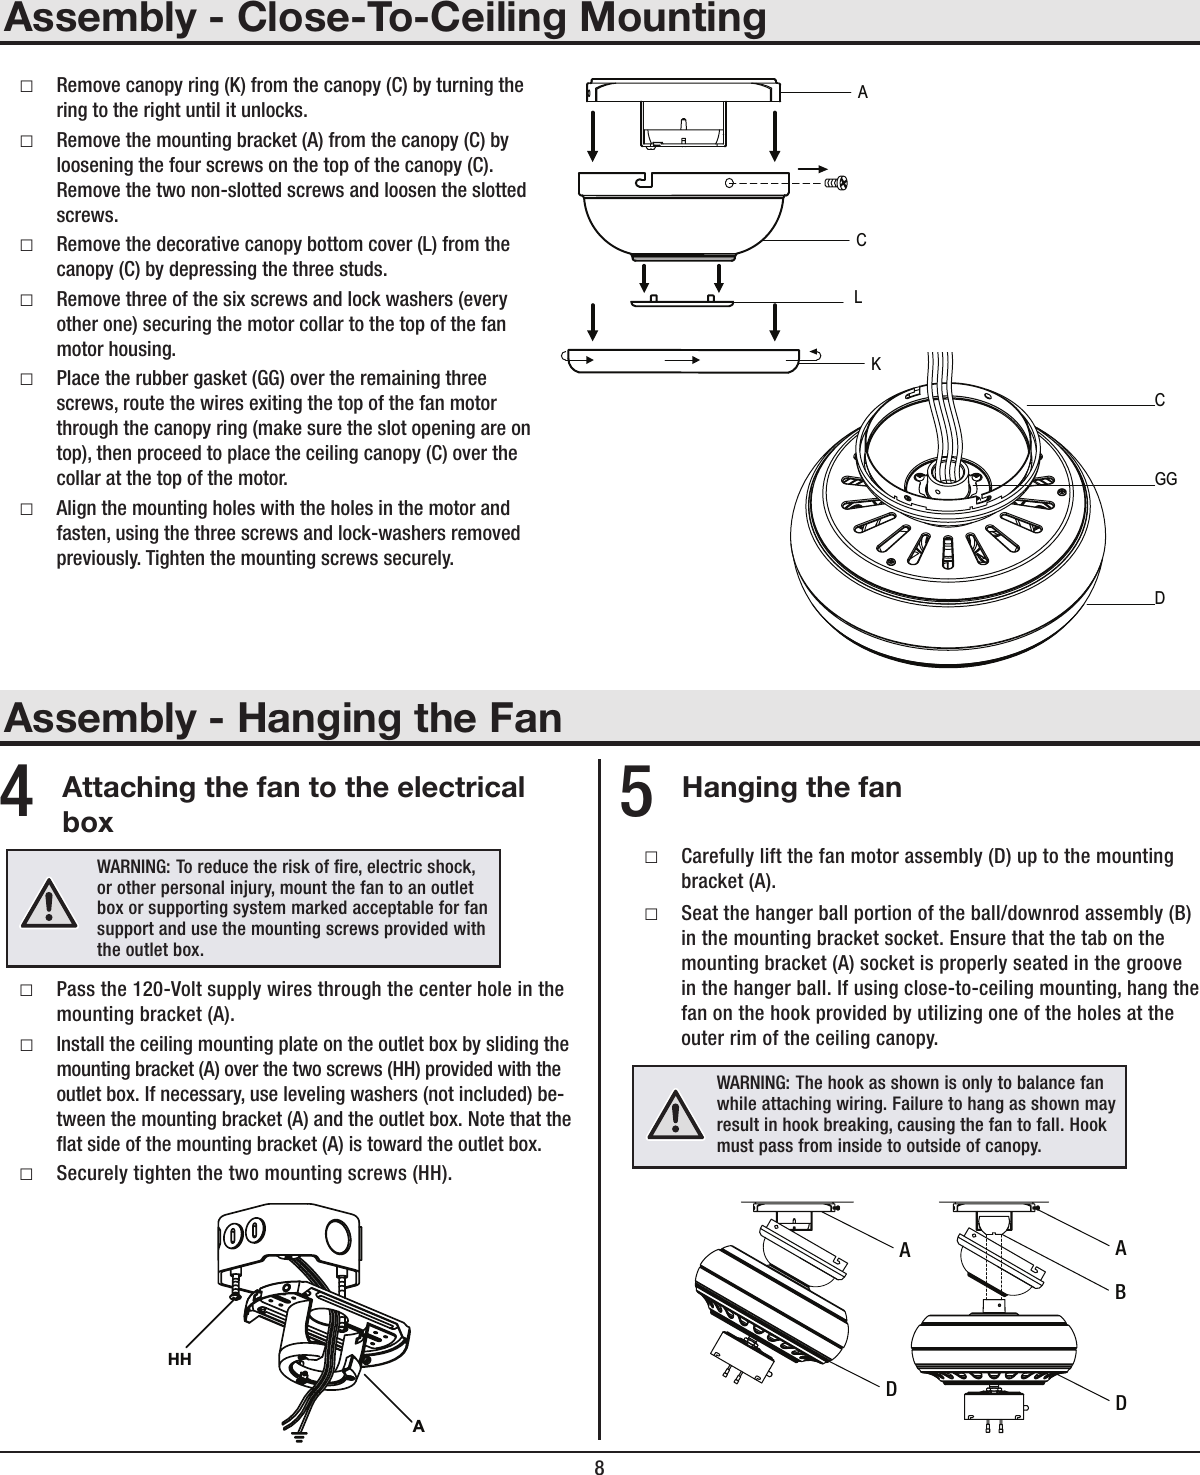 8Assembly - Close-To-Ceiling MountingAssembly - Hanging the Fan □Remove canopy ring (K) from the canopy (C) by turning the ring to the right until it unlocks.  □Remove the mounting bracket (A) from the canopy (C) by loosening the four screws on the top of the canopy (C). Remove the two non-slotted screws and loosen the slotted screws. □Remove the decorative canopy bottom cover (L) from the canopy (C) by depressing the three studs. □Remove three of the six screws and lock washers (every other one) securing the motor collar to the top of the fan motor housing. □Place the rubber gasket (GG) over the remaining three screws, route the wires exiting the top of the fan motor through the canopy ring (make sure the slot opening are on top), then proceed to place the ceiling canopy (C) over the collar at the top of the motor. □Align the mounting holes with the holes in the motor and fasten, using the three screws and lock-washers removed previously. Tighten the mounting screws securely.ACKLCGGDAttaching the fan to the electrical boxHanging the fan □Pass the 120-Volt supply wires through the center hole in the mounting bracket (A). □Install the ceiling mounting plate on the outlet box by sliding the mounting bracket (A) over the two screws (HH) provided with the outlet box. If necessary, use leveling washers (not included) be-tween the mounting bracket (A) and the outlet box. Note that the at side of the mounting bracket (A) is toward the outlet box. □Securely tighten the two mounting screws (HH). □Carefully lift the fan motor assembly (D) up to the mounting bracket (A). □Seat the hanger ball portion of the ball/downrod assembly (B) in the mounting bracket socket. Ensure that the tab on the mounting bracket (A) socket is properly seated in the groove in the hanger ball. If using close-to-ceiling mounting, hang the fan on the hook provided by utilizing one of the holes at the outer rim of the ceiling canopy.4 5WARNING:  To reduce the risk of re, electric shock, or other personal injury, mount the fan to an outlet box or supporting system marked acceptable for fan support and use the mounting screws provided with the outlet box.AHHWARNING:  The hook as shown is only to balance fan while attaching wiring. Failure to hang as shown may result in hook breaking, causing the fan to fall. Hook must pass from inside to outside of canopy.AABDD